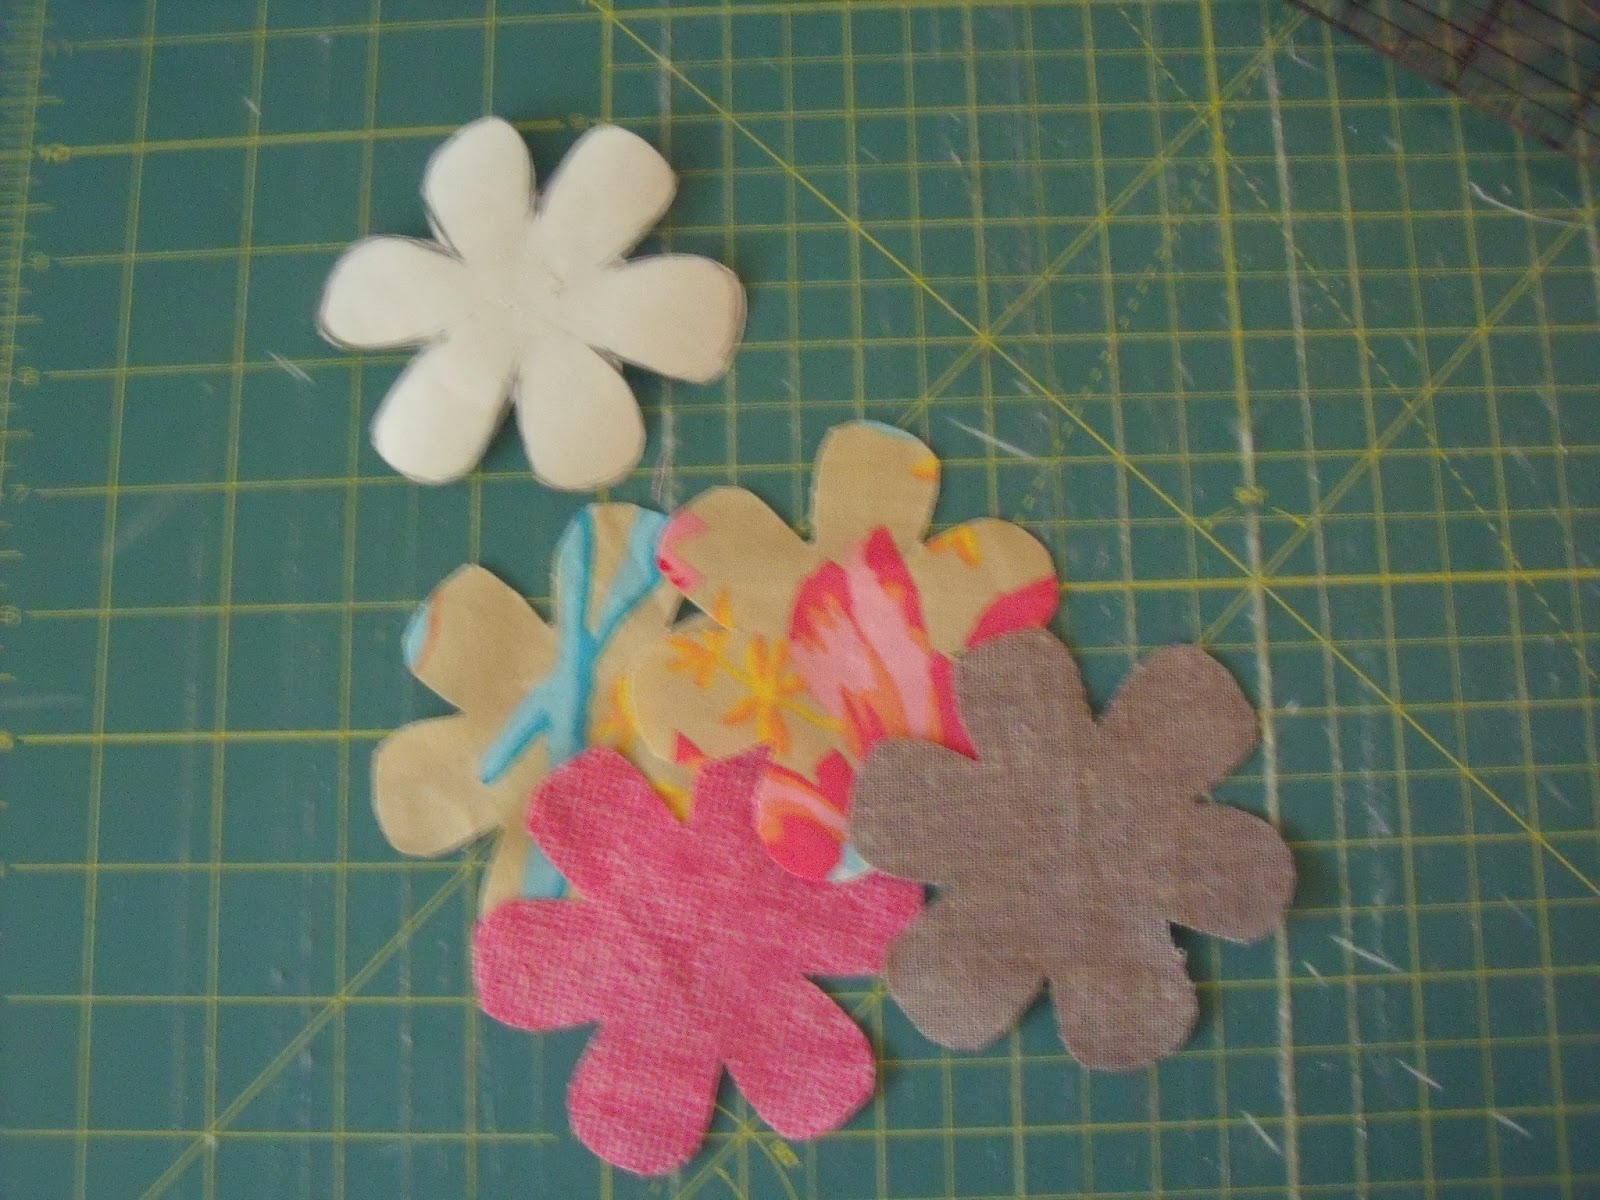 ... the flower pattern onto a piece of freezer paper or regular paper